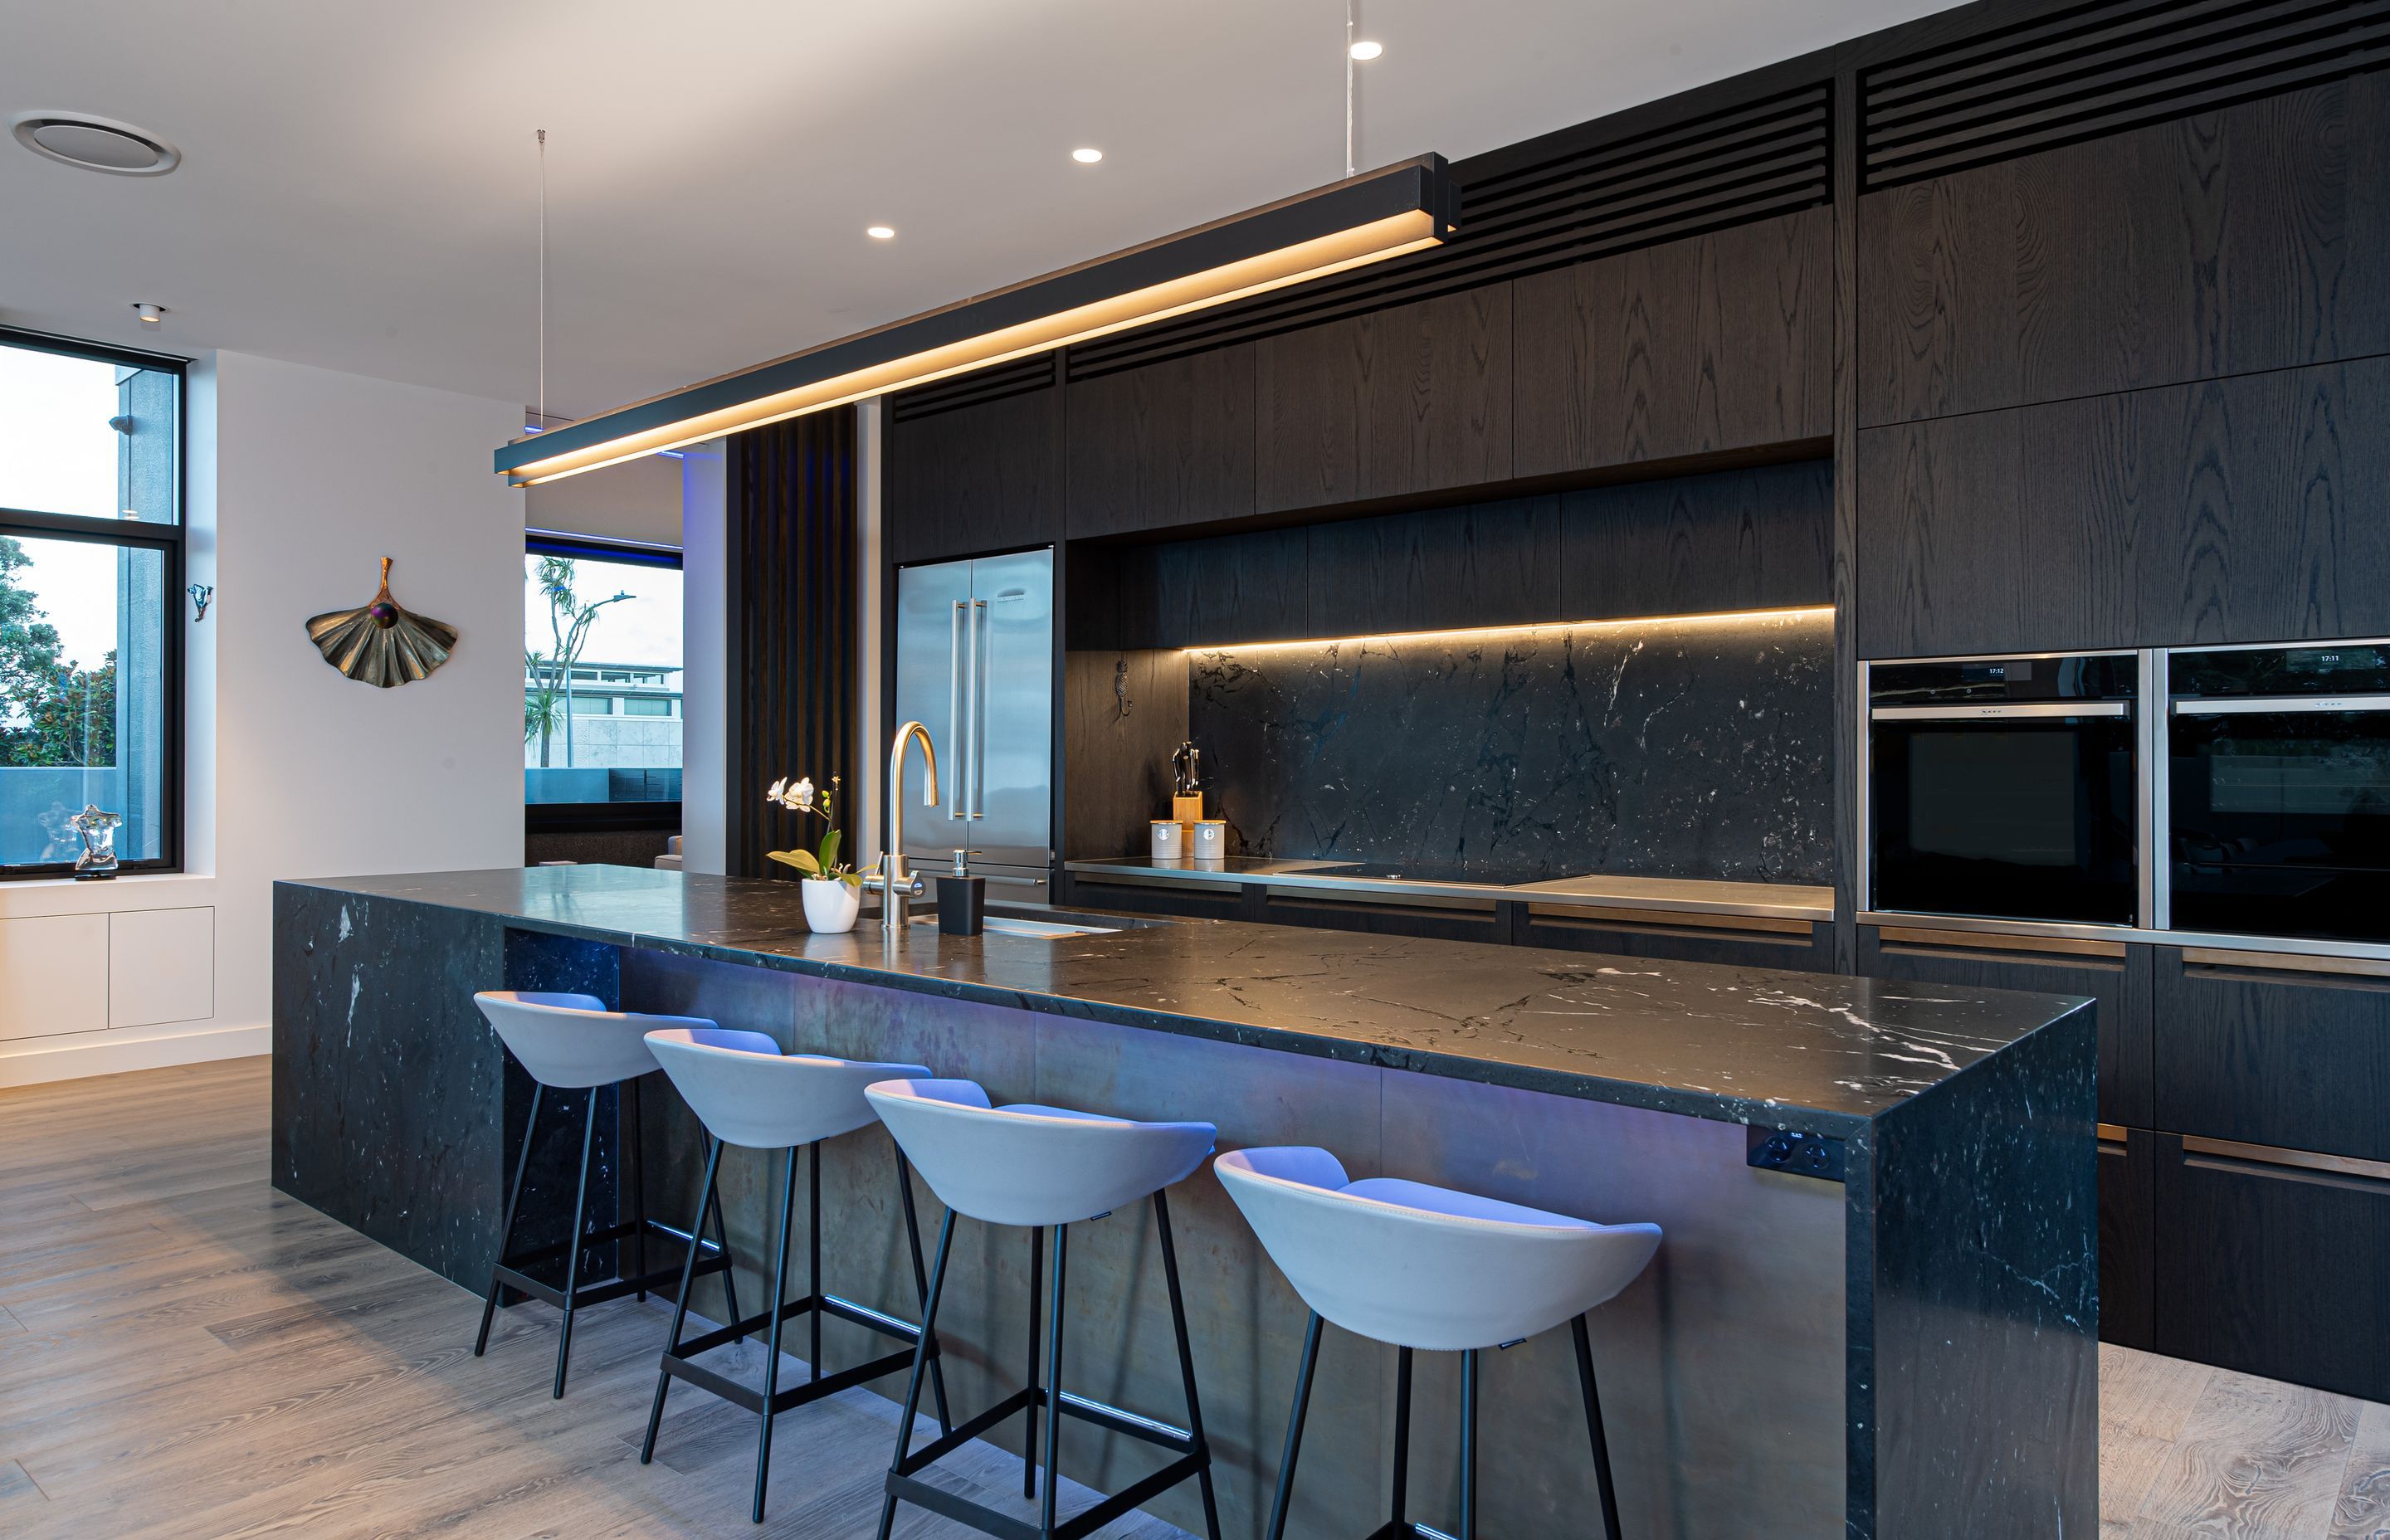 Customised Air Con Grille Enhances Luxury Kitchen